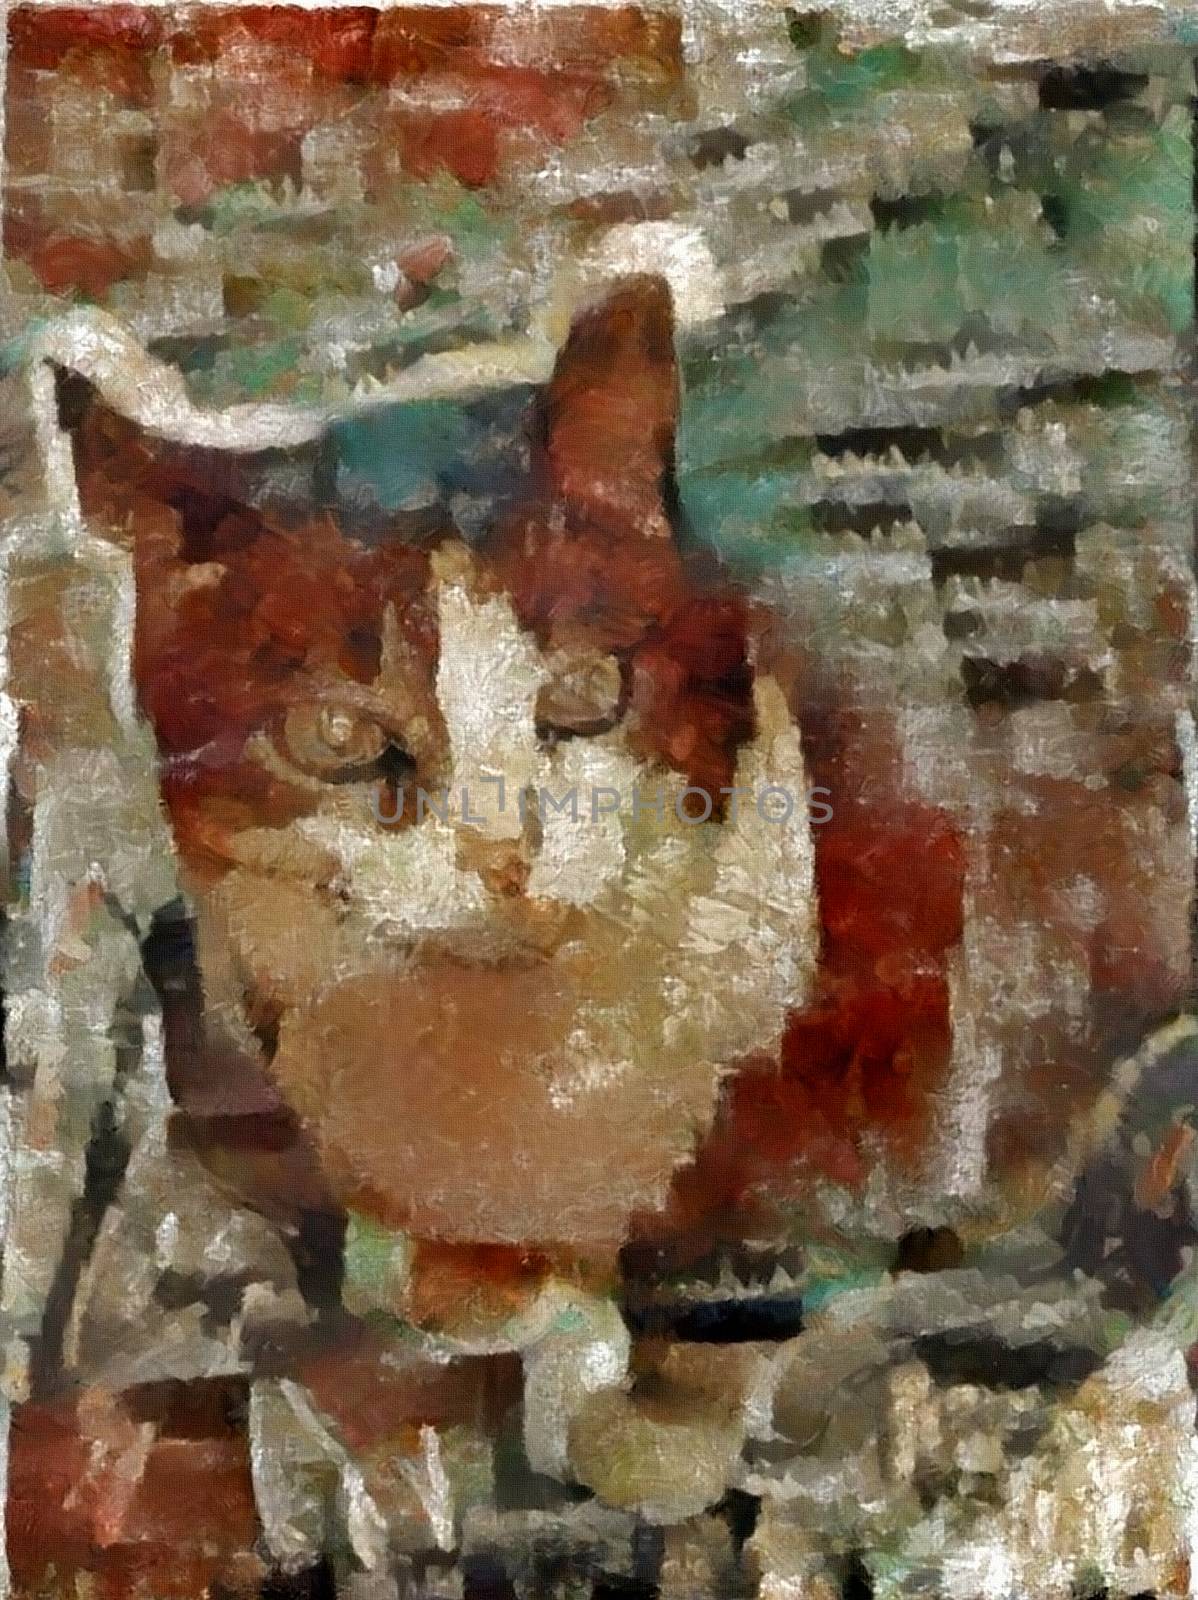 Cat. Oil painting on canvas